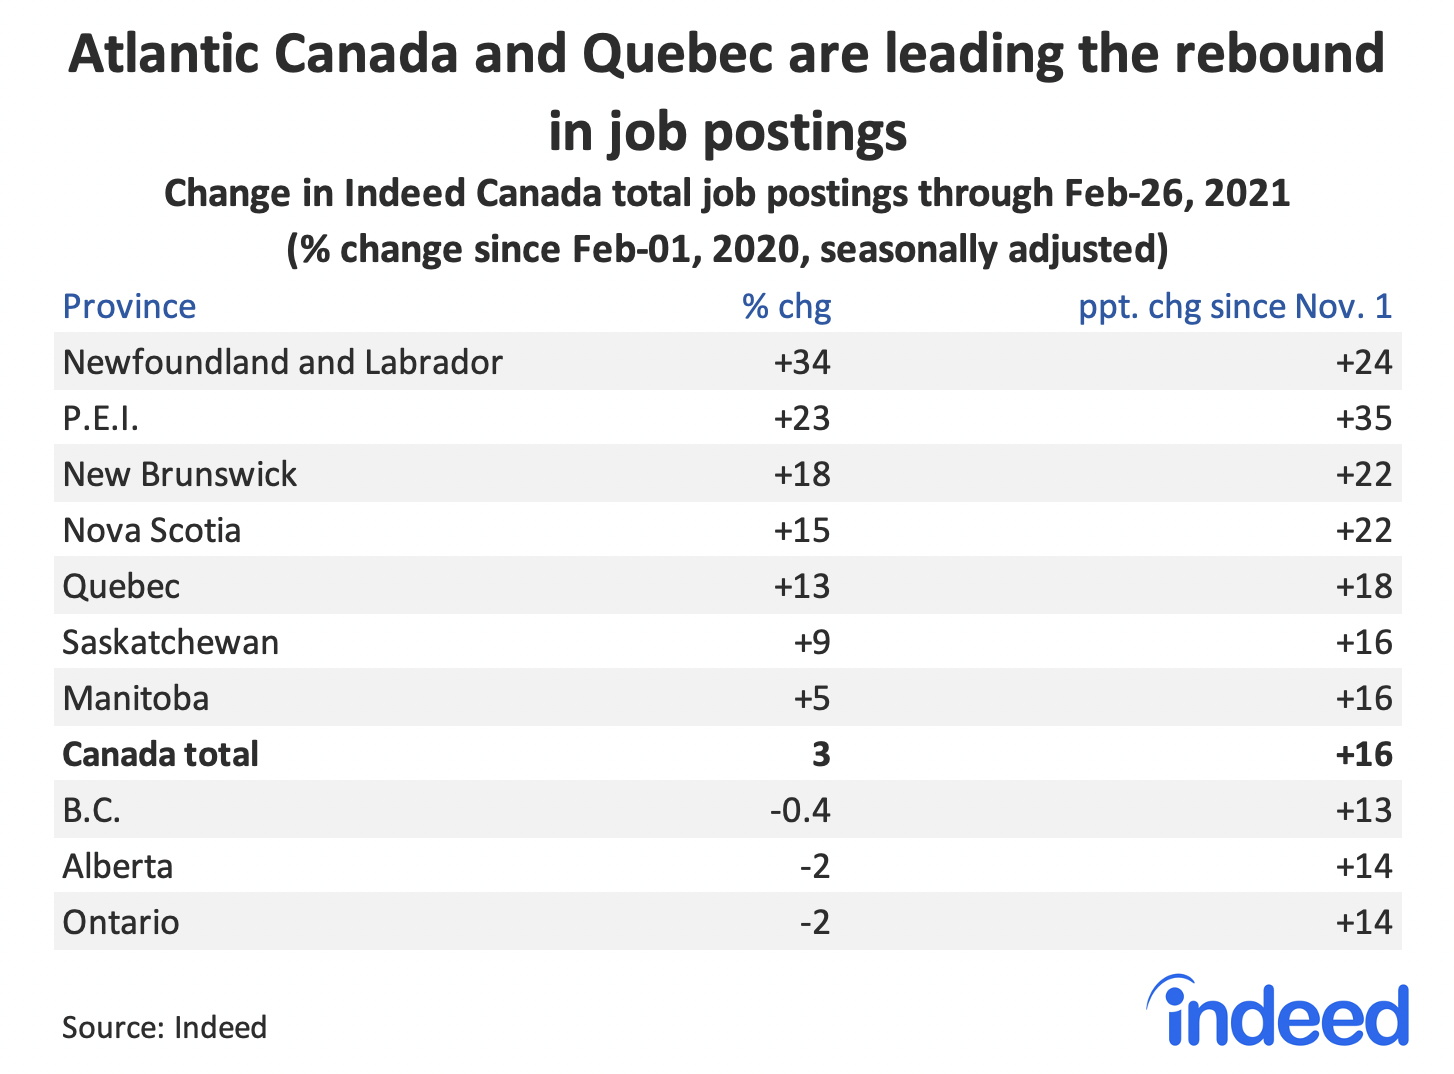 Table showing Atlantic Canada and Quebec are leading the rebound in job postings